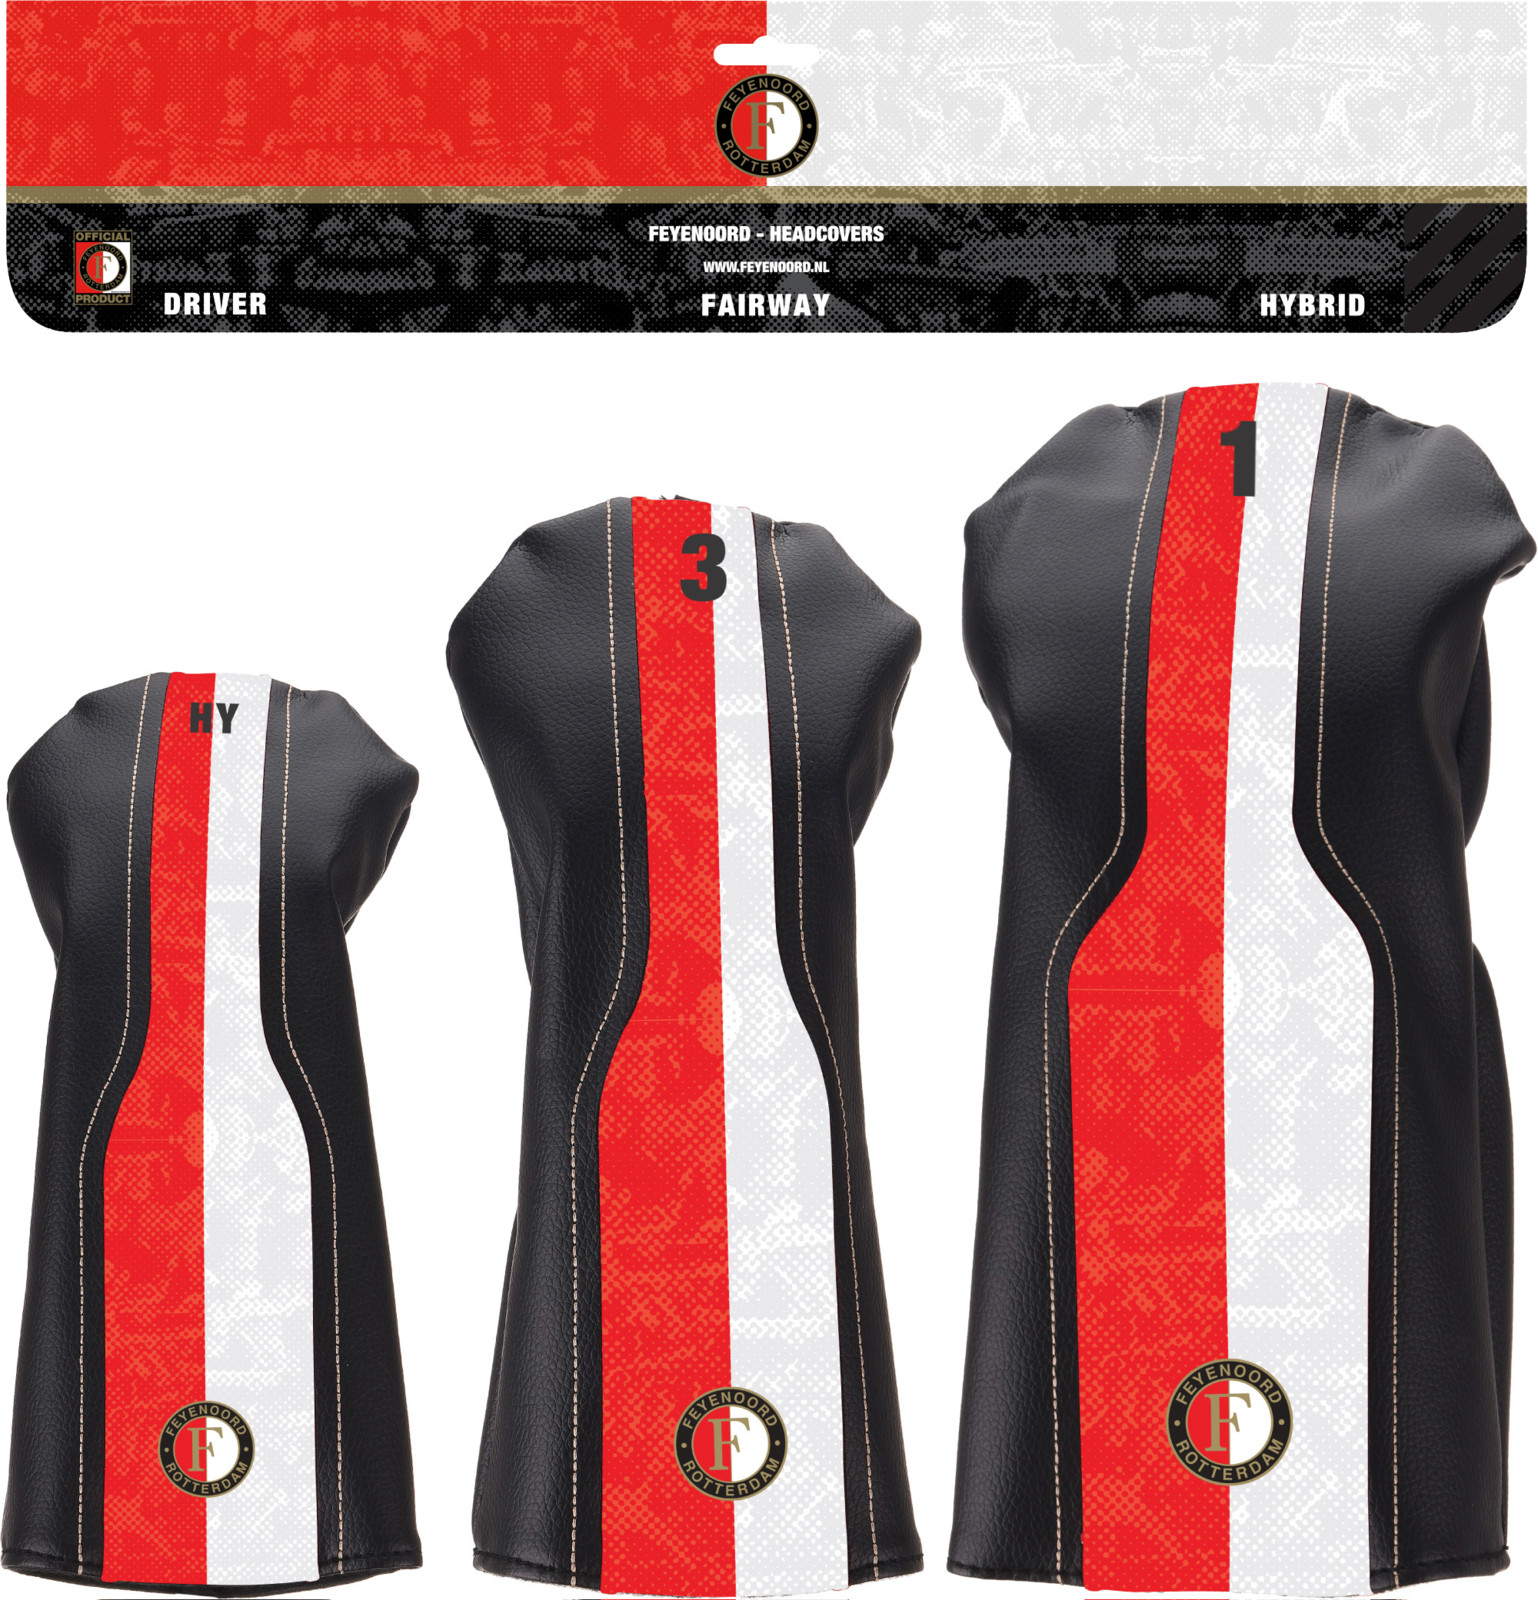 Feyenoord | Headcover Driver Wood and Hybrid | Limited Edition